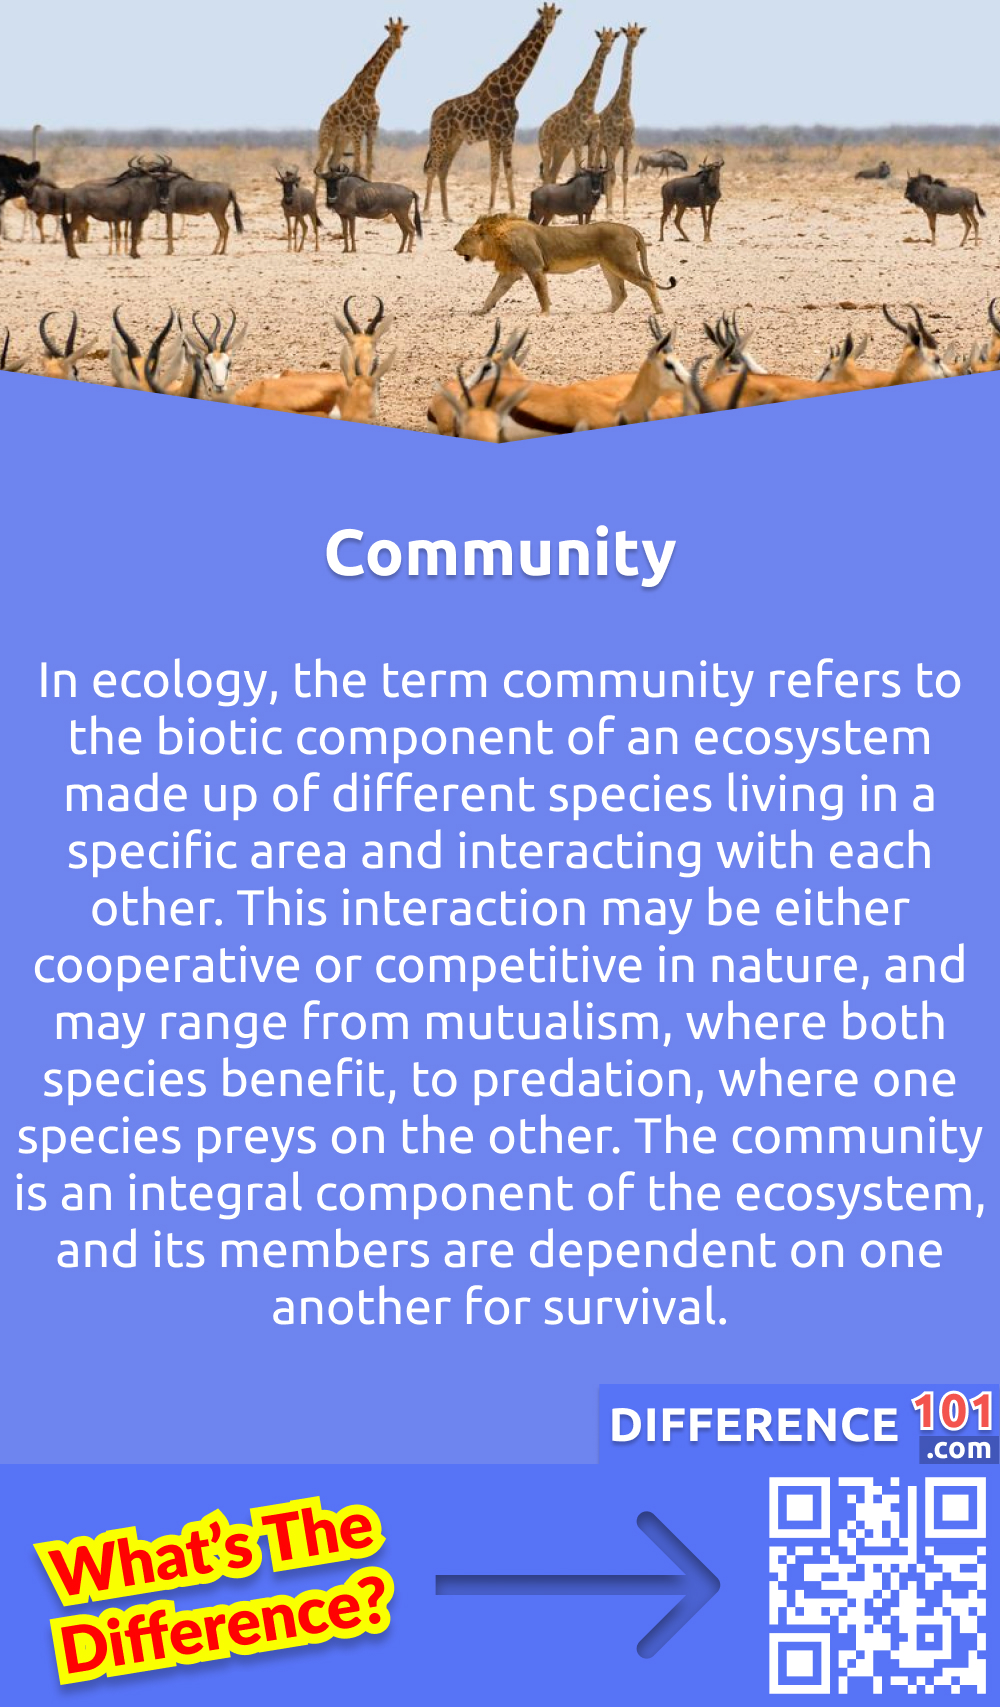 What Is Community? In ecology, the term community refers to the biotic component of an ecosystem made up of different species living in a specific area and interacting with each other. This interaction may be either cooperative or competitive in nature, and may range from mutualism, where both species benefit, to predation, where one species preys on the other. The community is an integral component of the ecosystem, and its members are dependent on one another for survival. The structure and composition of a community reflect the abiotic and biotic factors present in the ecosystem, such as climate, topography, nutrients, and species interactions. Understanding community dynamics is essential in predicting how changes in the environment may impact the ecosystem's functioning.